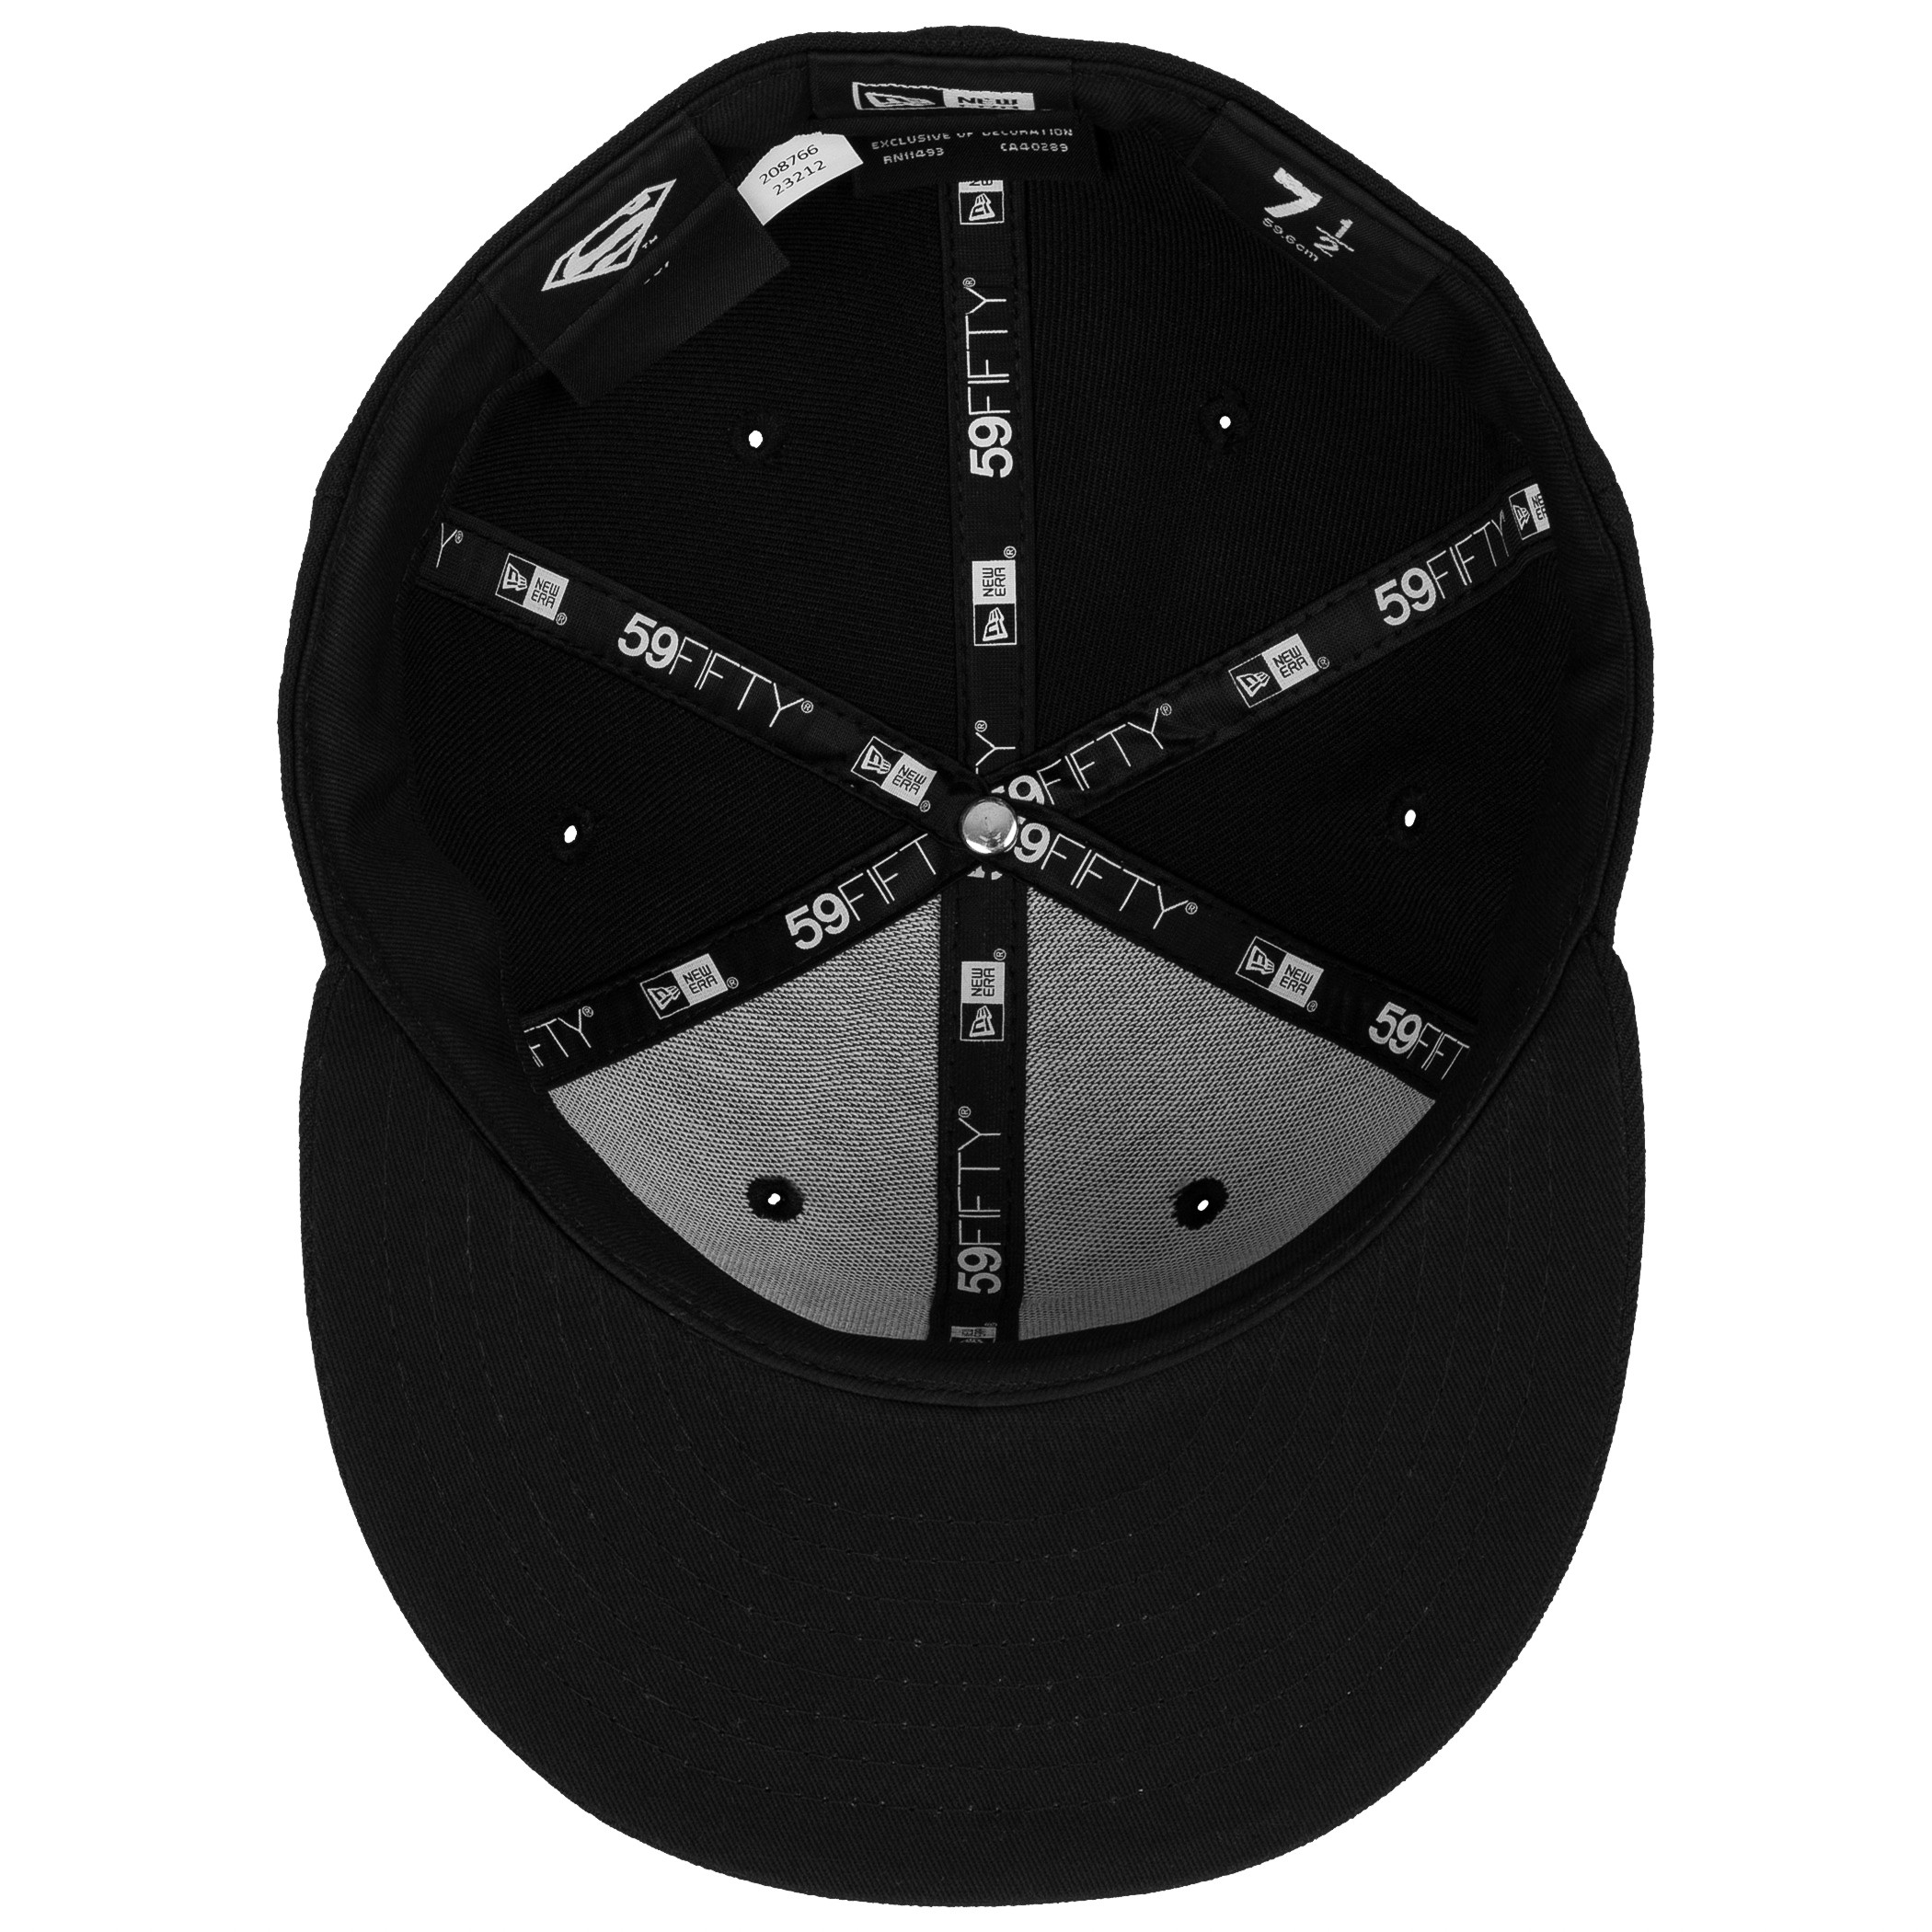 Superman Logo Black on Black New Era 59Fifty Fitted Hat